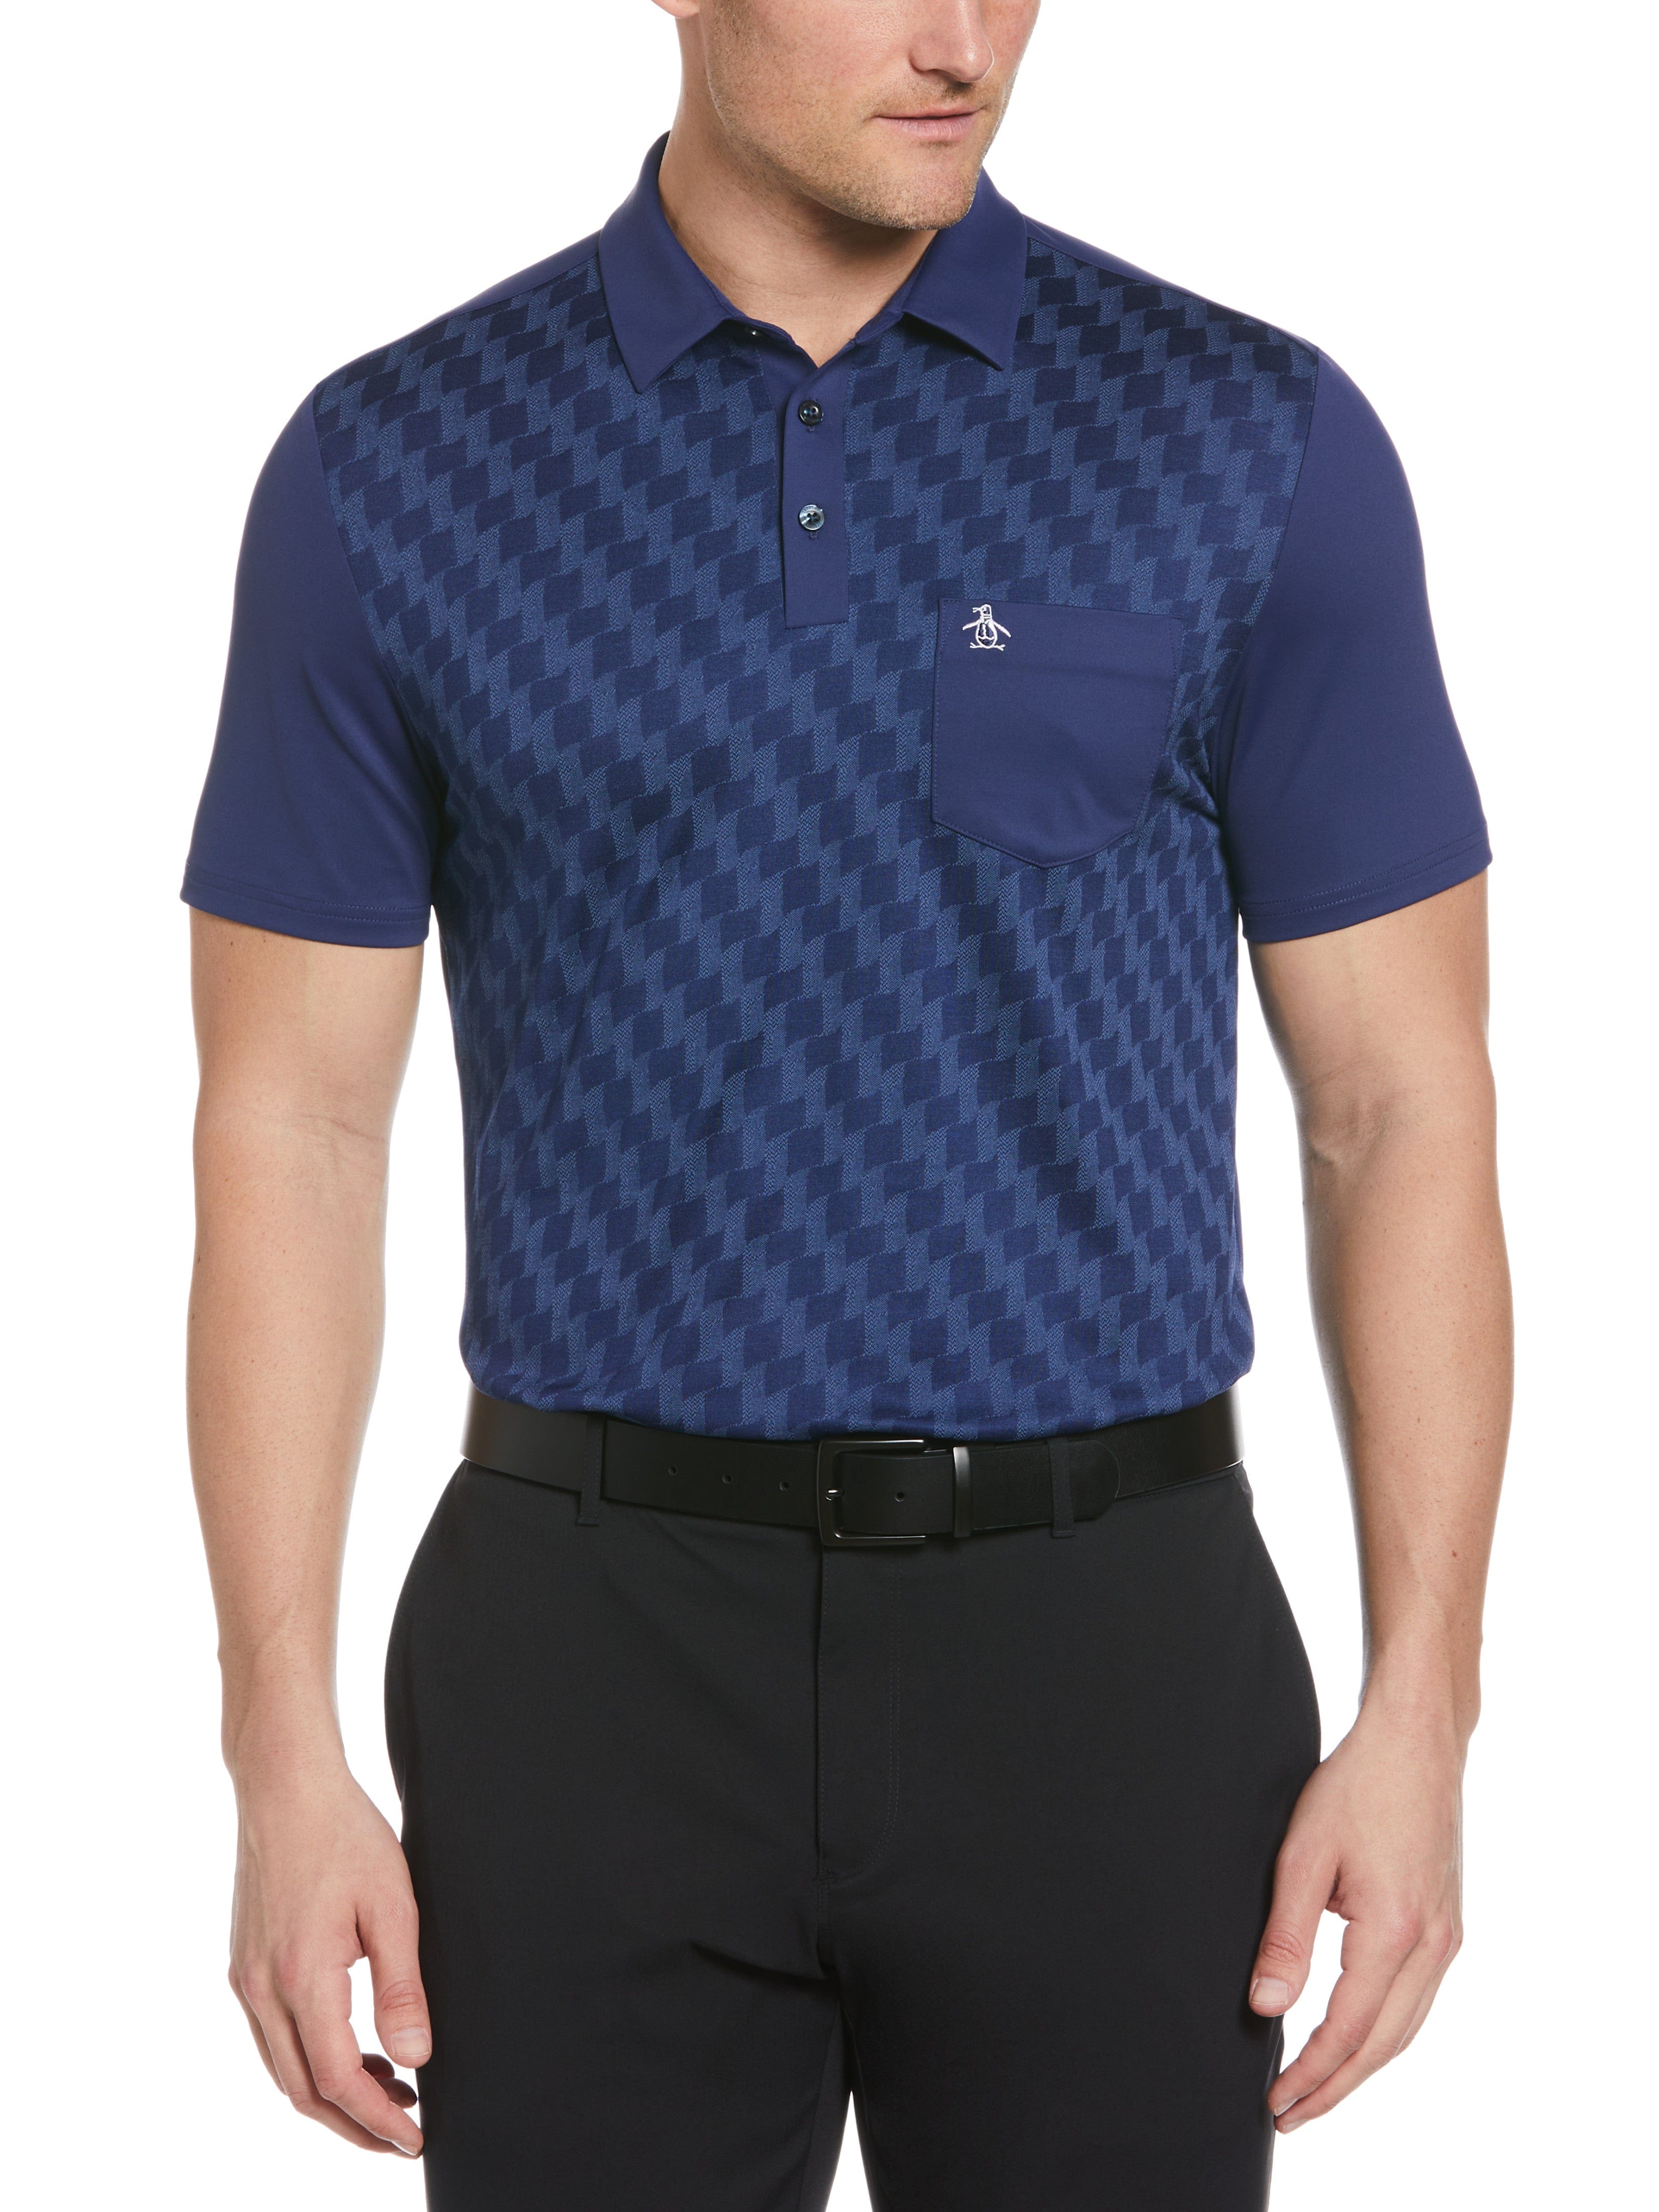 Original Penguin Mens 50s Color Block Print Golf Polo Shirt, Size 2XL, Astral Night Blue, Polyester/Recycled Polyester/Elastane | Golf Apparel Shop